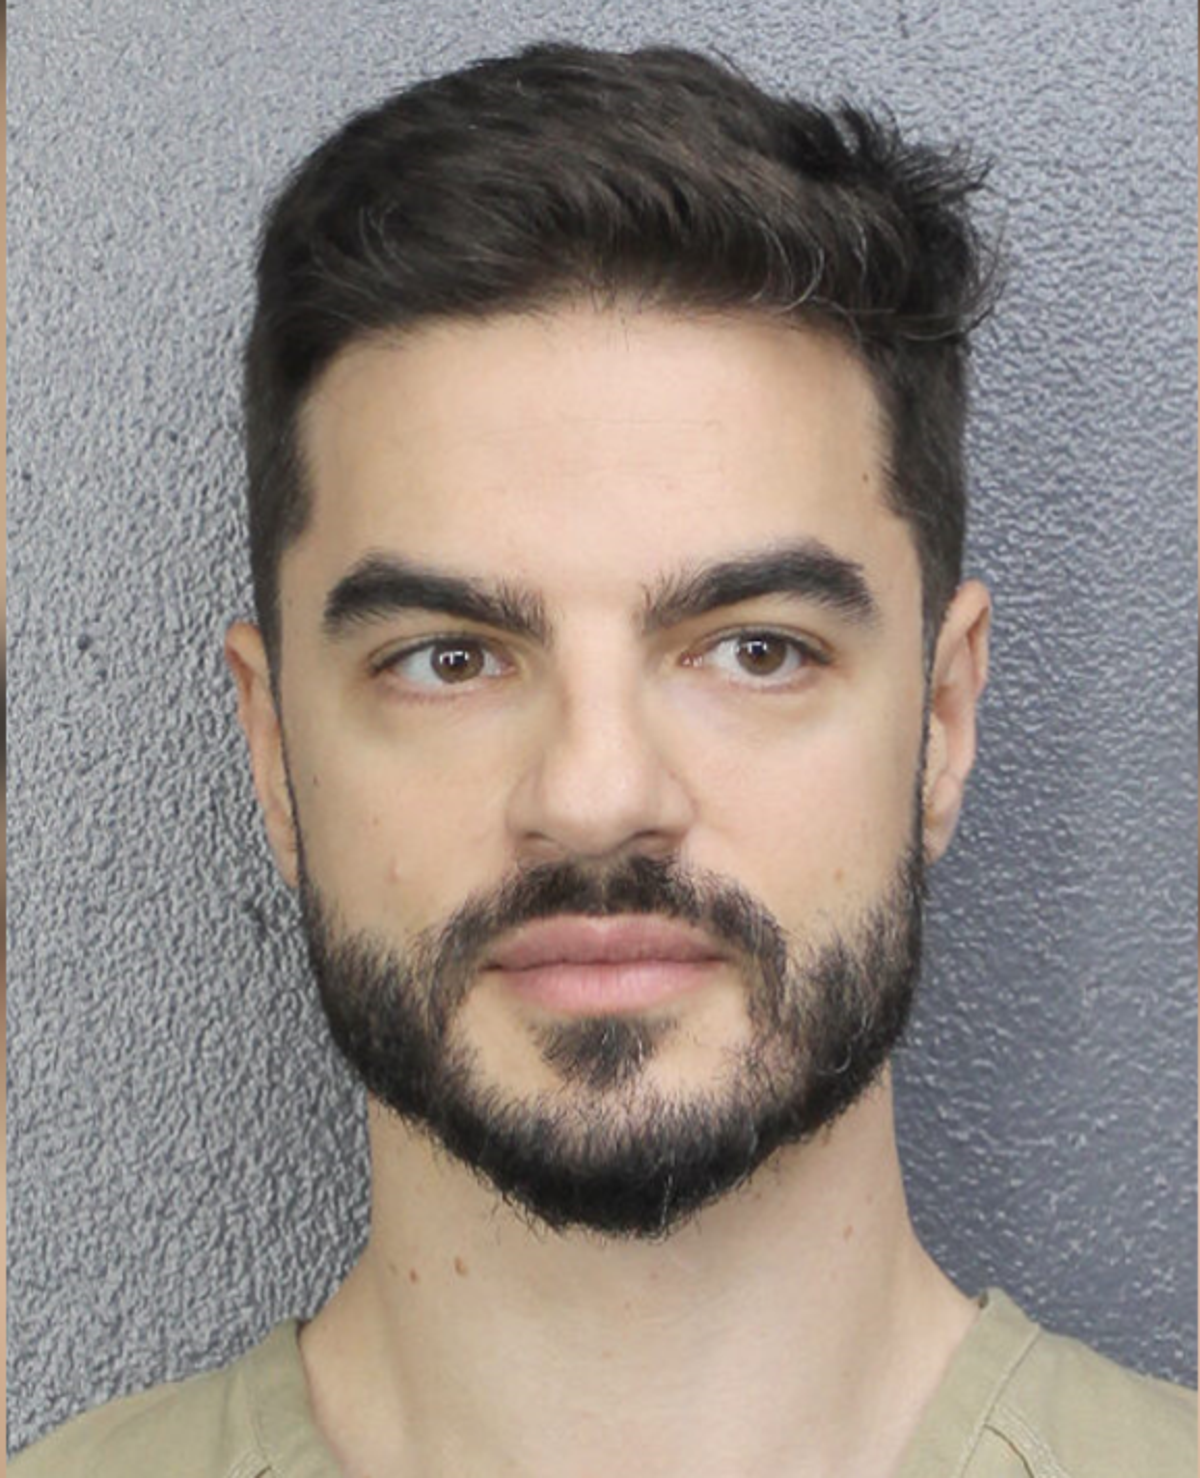 David Knezevich, 36, after his arrest by US Marshals at the Miami International Airport on 6 May in connection with his estranged wife’s disappearance in Spain (FBI handout)